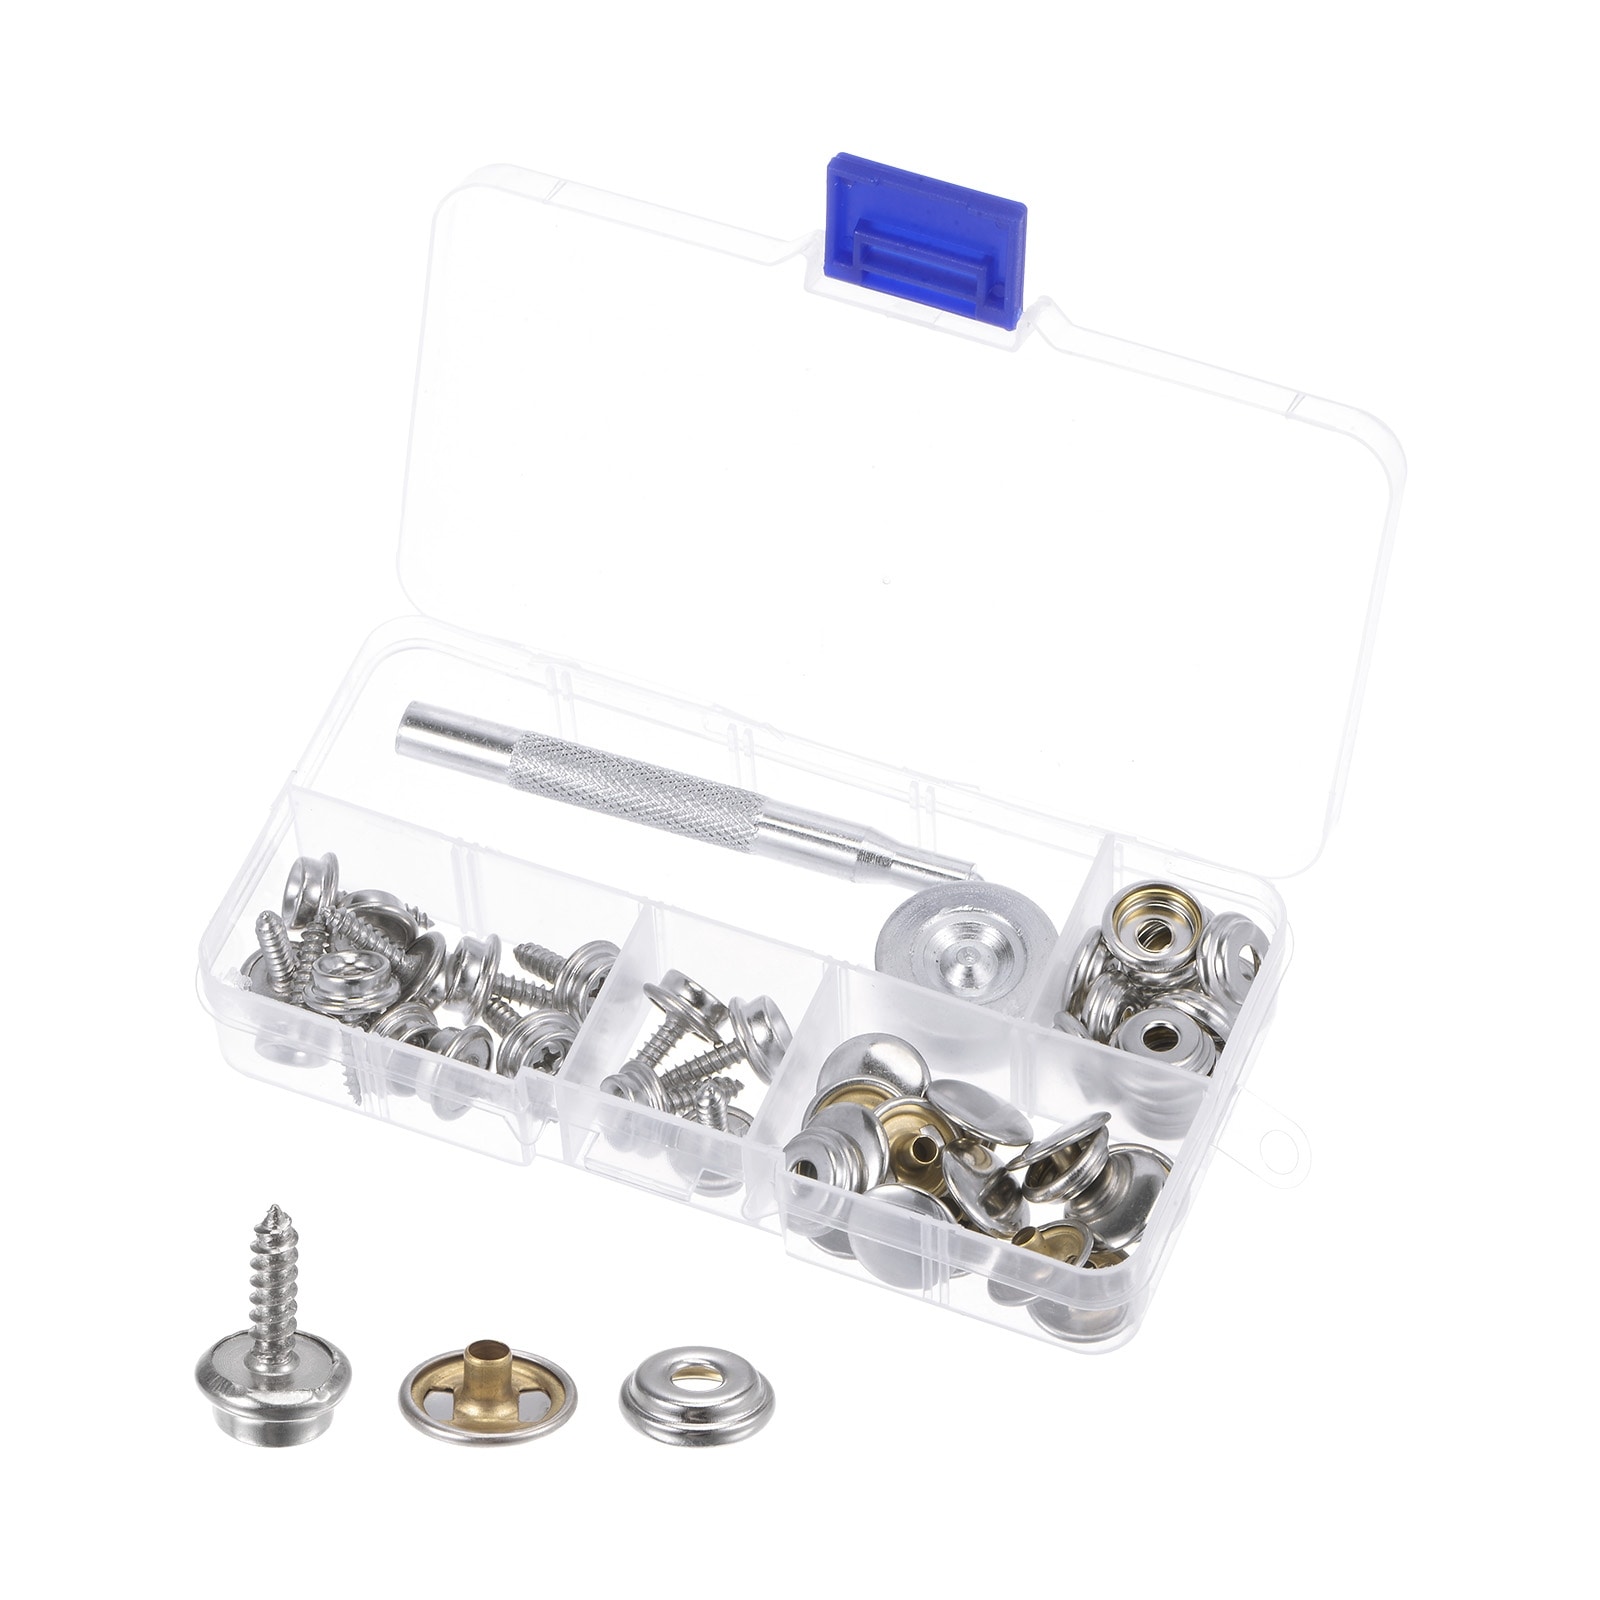 Canvas Snap Kit Metal Button 15mm with Tool, Silver Tone, 15 Sets